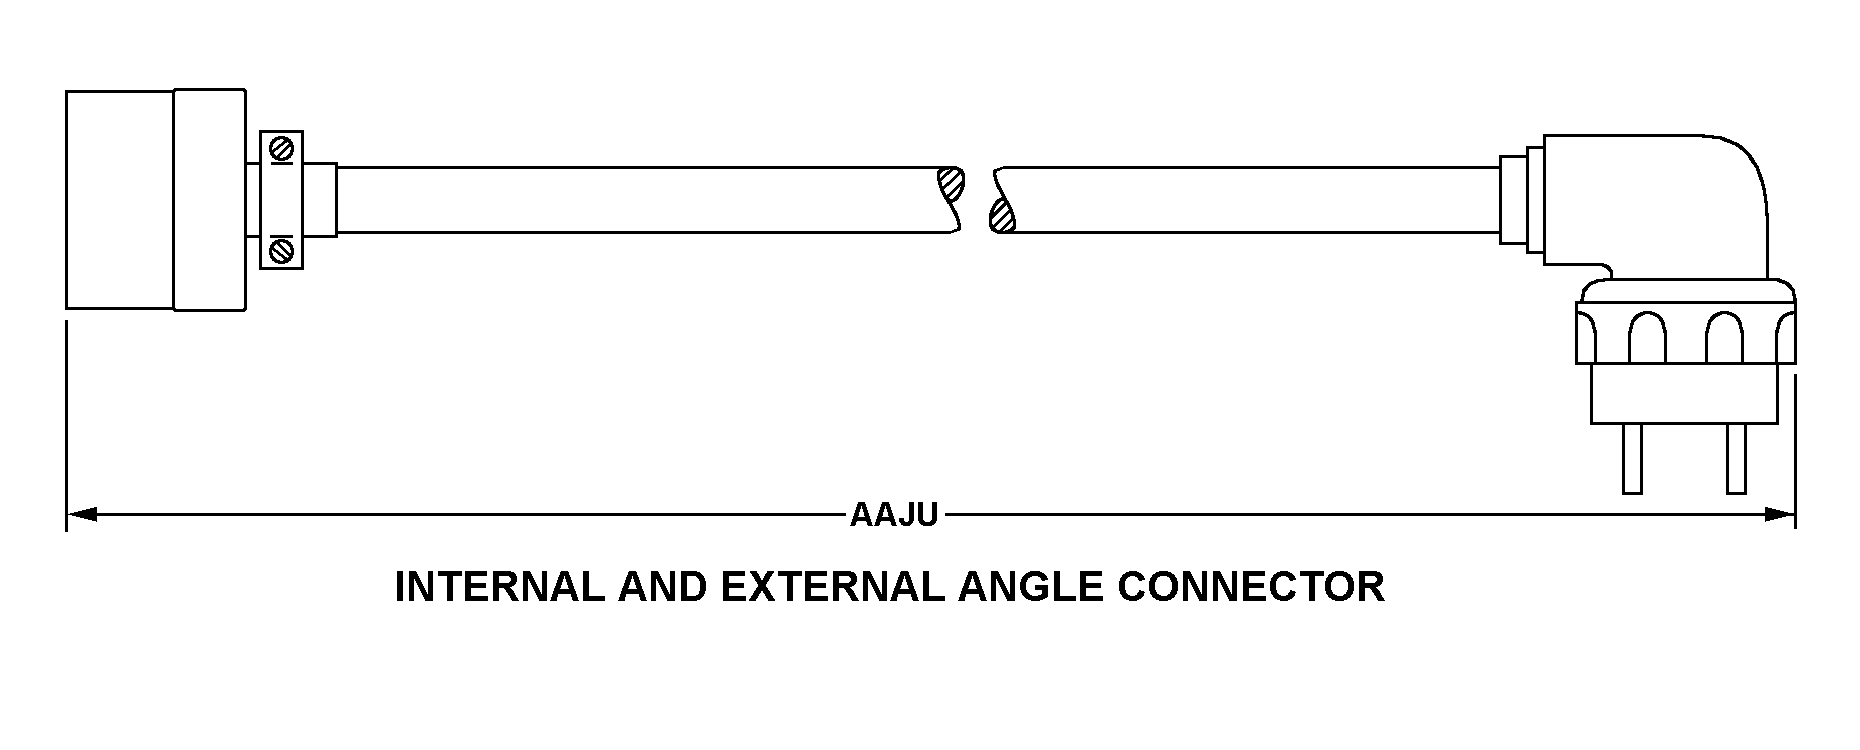 INTERNAL AND EXTERNAL ANGLE CONNECTOR style nsn 5995-01-073-6772